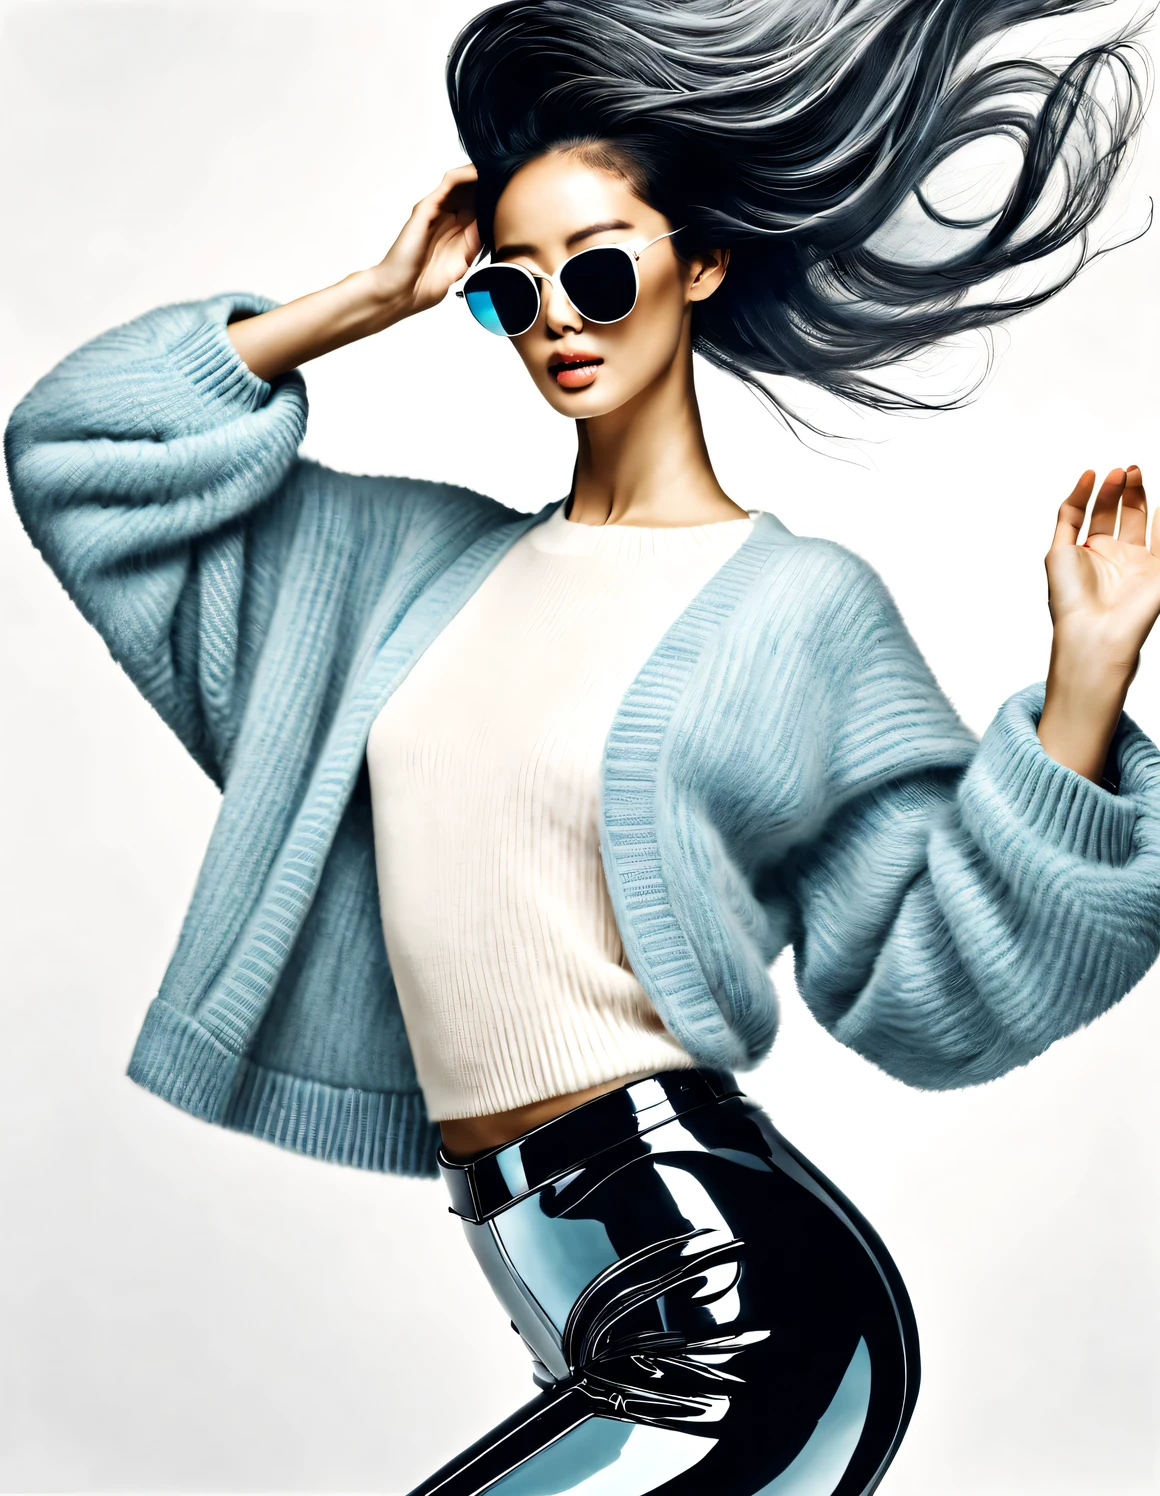 (Modern art dance simple poster design), (Half-length close-up), (Beautiful Chinese girl dancing in the air), (wearing sunglasses: 1.37), (Hair, hair covering one eye, shiny hair hairstyle: 1.2) The pastel tones of a light blue jacket and an off-white floral sweater blend together, The black and white plaid pants also have a sharp contrast, Characterized by exquisite details and layering, Both fashionable and softly feminine, Wear modern and stylish winter fashion, thin waist, high nose bridge, Head up posture, sad yet beautiful, slender figure, Exquisite facial features,
background: briefcase dance, fog illustration, ink painting, black hair, Proud, Surrealism, contemporary art photography, action painting illustration, abstract expressionism, Pixar, depth of field, motion blur, backlight, Falling shadows, Vignetting, Elevation viewing angle, Sony FE General Manager, ultra high definition, masterpiece, Accuracy, textured skin, Super details, high detail, high quality, Award-winning, best quality, Level, 16k, Photographed from a bottom-up perspective,